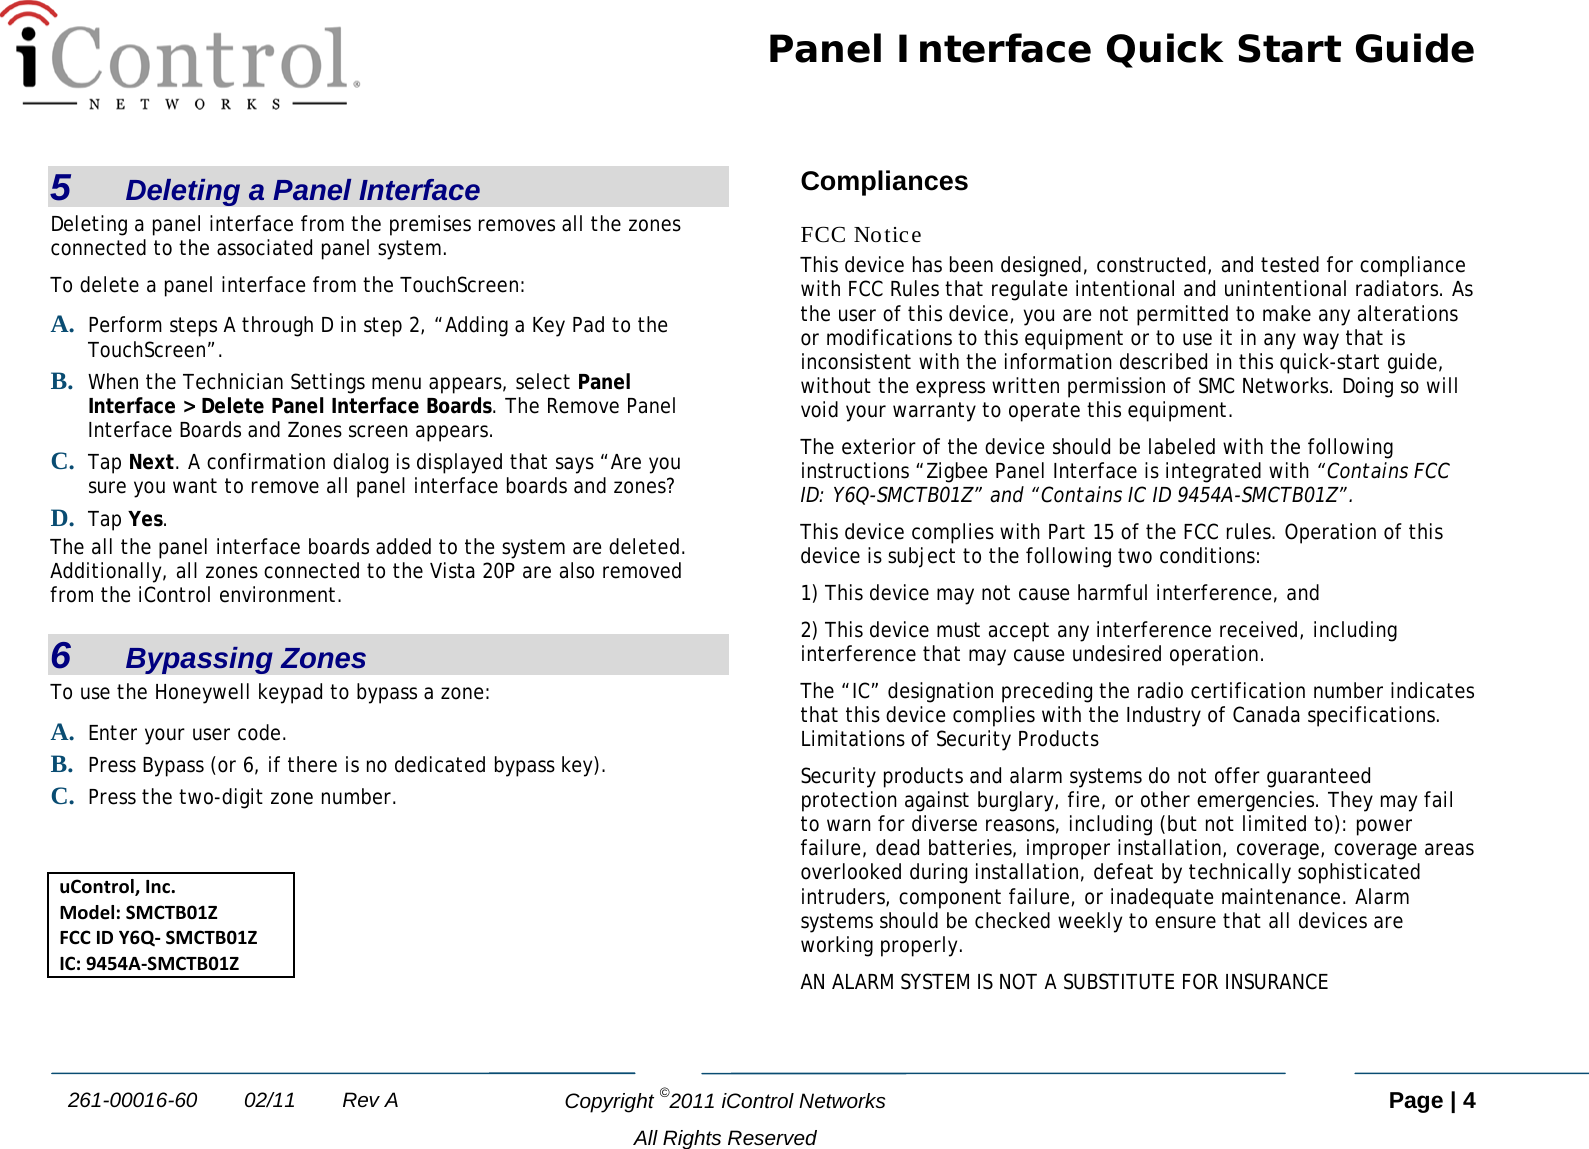 Panel Interface Quick Start Guide   Copyright ©2011 iControl Networks   Page | 4  All Rights Reserved 261-00016-60        02/11        Rev A 5   Deleting a Panel Interface Deleting a panel interface from the premises removes all the zones connected to the associated panel system.  To delete a panel interface from the TouchScreen:  A. Perform steps A through D in step 2, “Adding a Key Pad to the TouchScreen”. B. When the Technician Settings menu appears, select Panel Interface &gt; Delete Panel Interface Boards. The Remove Panel Interface Boards and Zones screen appears. C. Tap Next. A confirmation dialog is displayed that says “Are you sure you want to remove all panel interface boards and zones?  D. Tap Yes. The all the panel interface boards added to the system are deleted. Additionally, all zones connected to the Vista 20P are also removed from the iControl environment. 6   Bypassing Zones To use the Honeywell keypad to bypass a zone: A. Enter your user code. B. Press Bypass (or 6, if there is no dedicated bypass key). C. Press the two-digit zone number.   uControl, Inc. Model: SMCTB01Z FCC ID Y6Q- SMCTB01Z IC: 9454A-SMCTB01Z  Compliances FCC Notice This device has been designed, constructed, and tested for compliance with FCC Rules that regulate intentional and unintentional radiators. As the user of this device, you are not permitted to make any alterations or modifications to this equipment or to use it in any way that is inconsistent with the information described in this quick-start guide, without the express written permission of SMC Networks. Doing so will void your warranty to operate this equipment. The exterior of the device should be labeled with the following instructions “Zigbee Panel Interface is integrated with “Contains FCC ID: Y6Q-SMCTB01Z” and “Contains IC ID 9454A-SMCTB01Z”. This device complies with Part 15 of the FCC rules. Operation of this device is subject to the following two conditions:  1) This device may not cause harmful interference, and  2) This device must accept any interference received, including interference that may cause undesired operation. The “IC” designation preceding the radio certification number indicates that this device complies with the Industry of Canada specifications. Limitations of Security Products Security products and alarm systems do not offer guaranteed protection against burglary, fire, or other emergencies. They may fail to warn for diverse reasons, including (but not limited to): power failure, dead batteries, improper installation, coverage, coverage areas overlooked during installation, defeat by technically sophisticated intruders, component failure, or inadequate maintenance. Alarm systems should be checked weekly to ensure that all devices are working properly.  AN ALARM SYSTEM IS NOT A SUBSTITUTE FOR INSURANCE